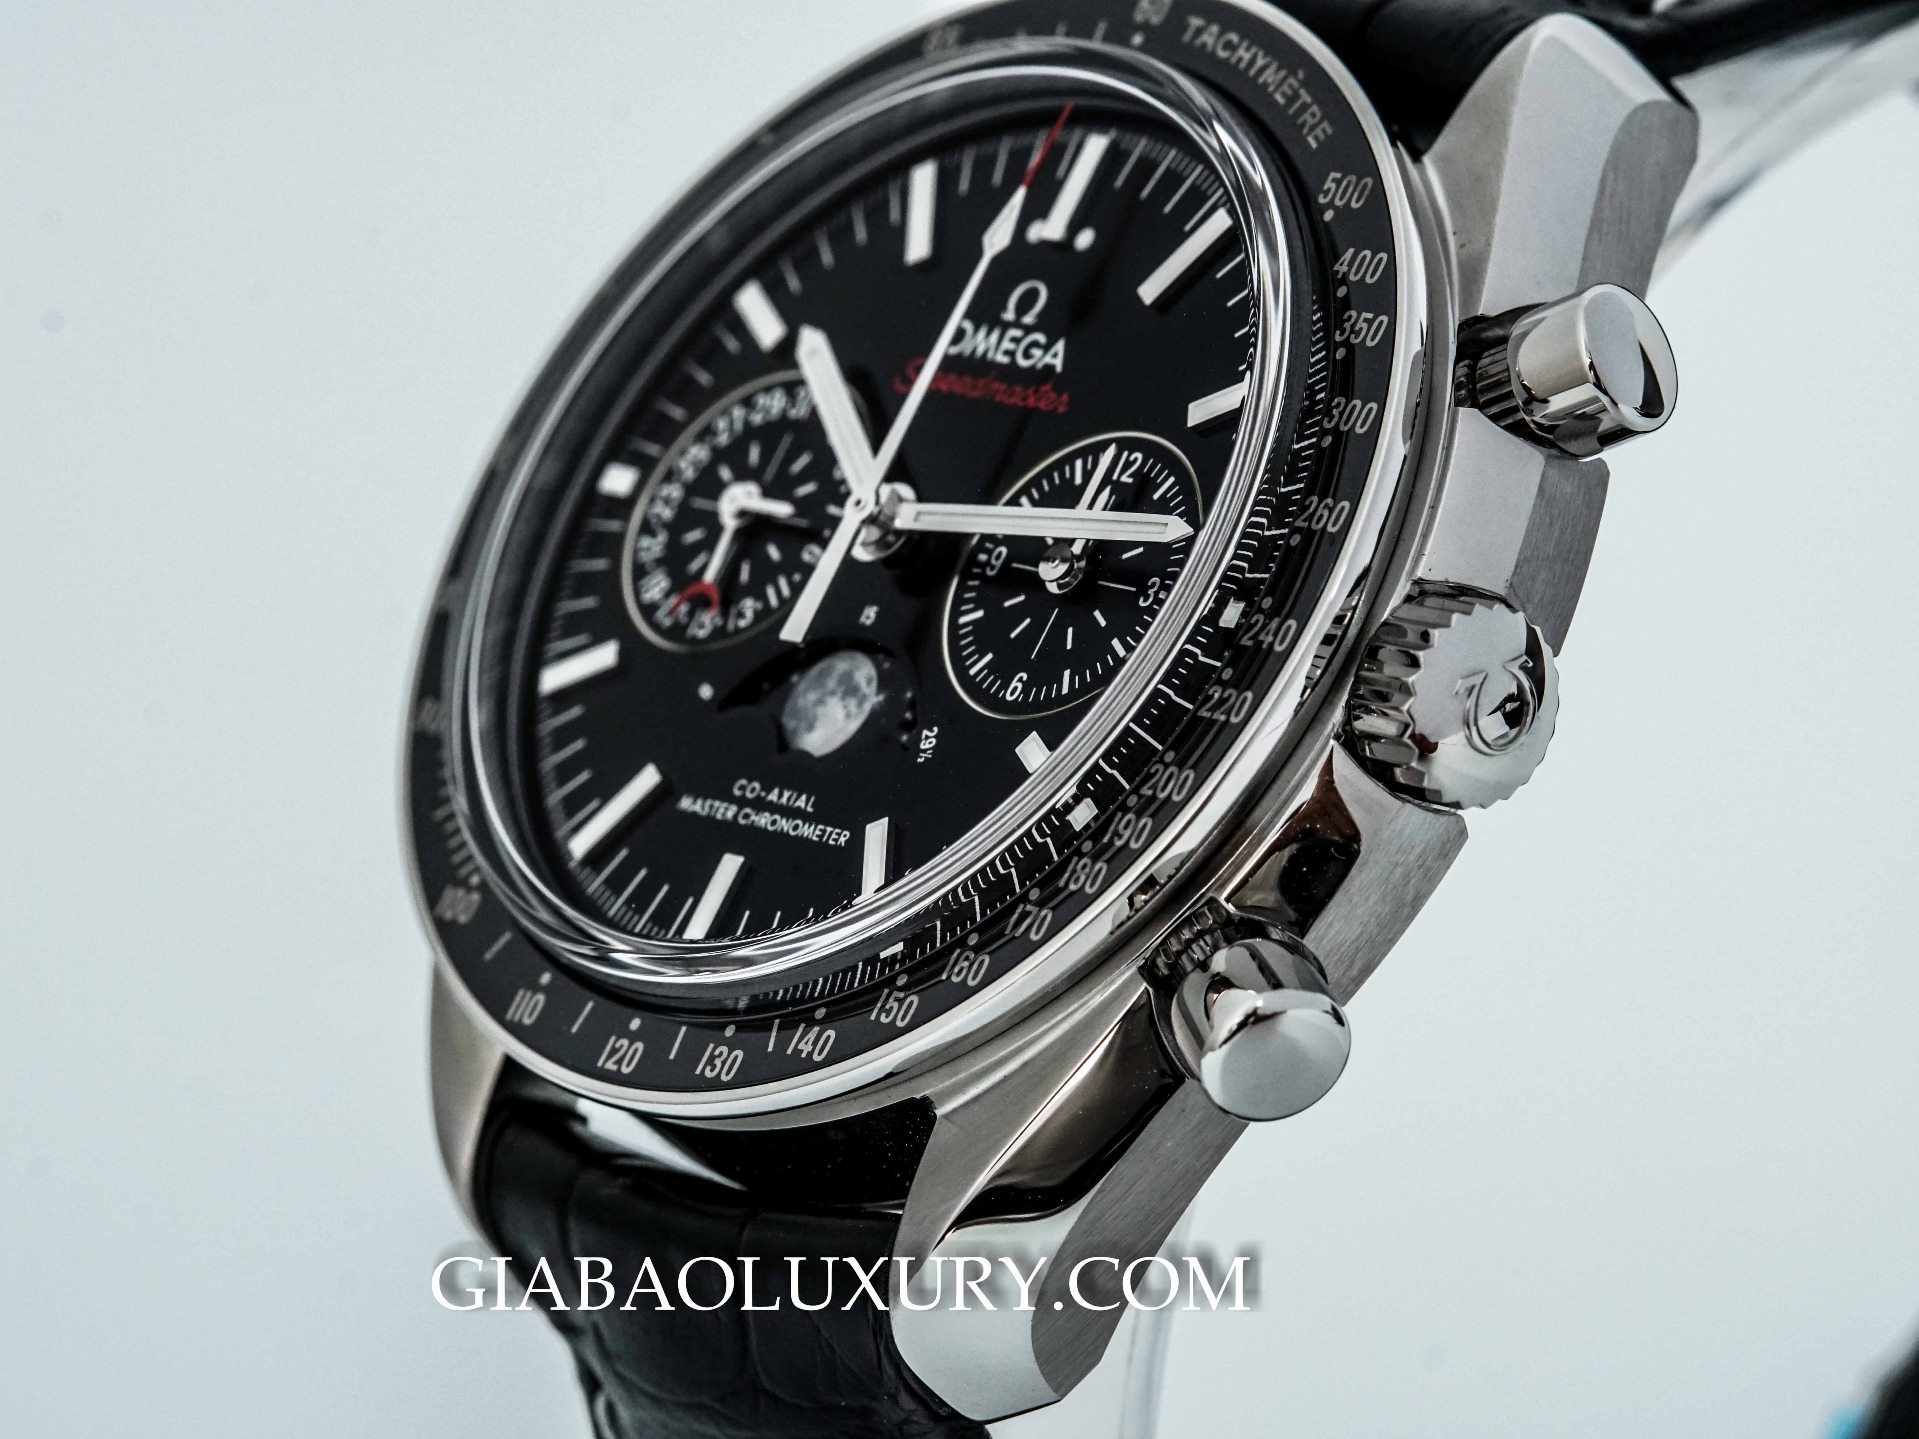 Đồng Hồ Omega Speedmaster Moonwatch Co-Axial Master Chronometer Moonphase Chronograph 44.25mm 304.33.44.52.01.001